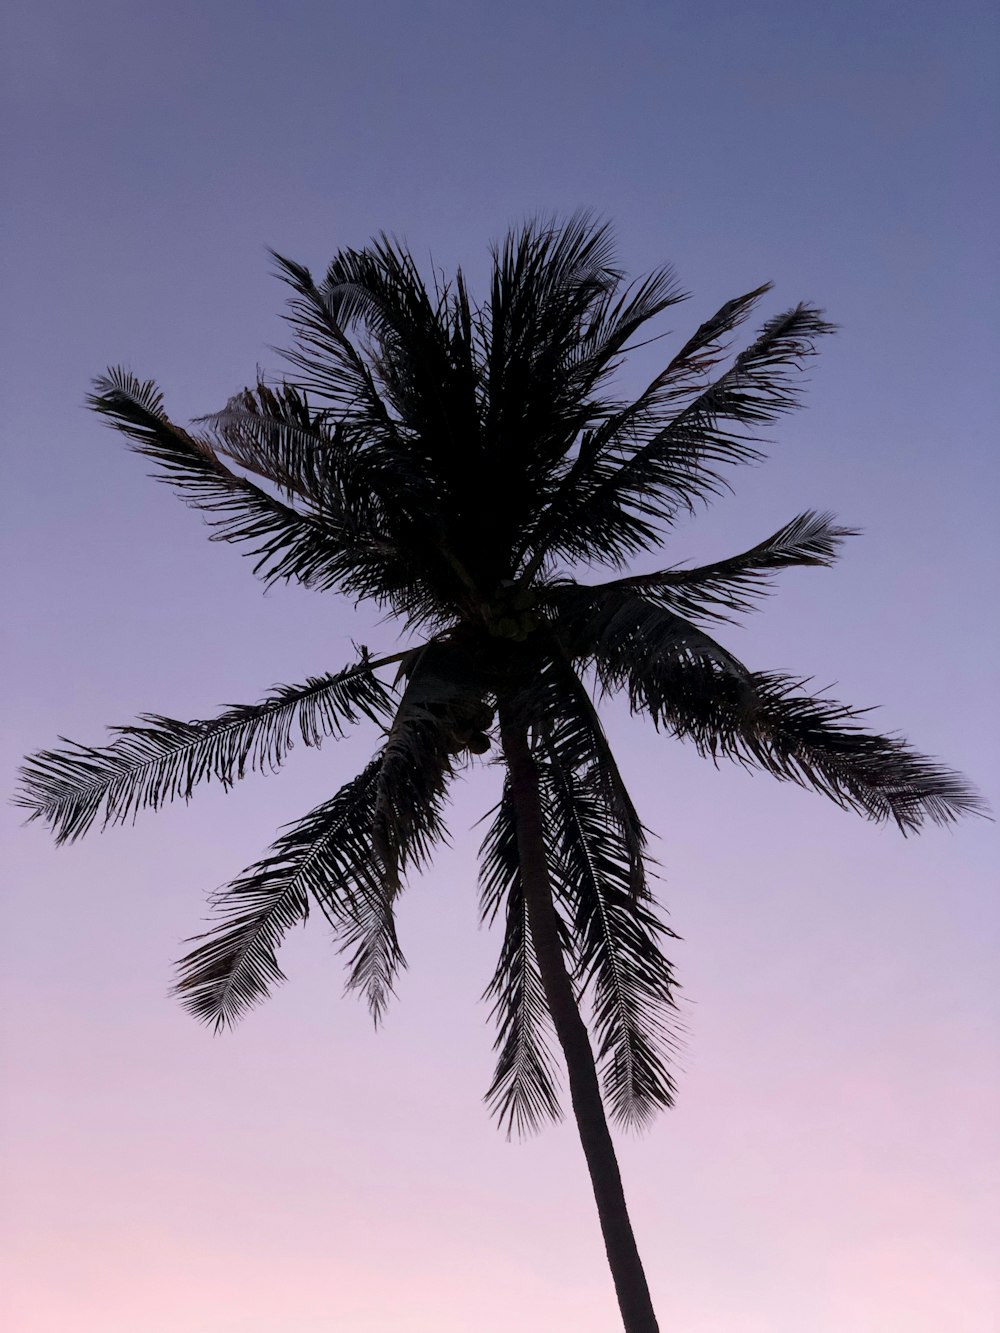 coconut tree close-up photography